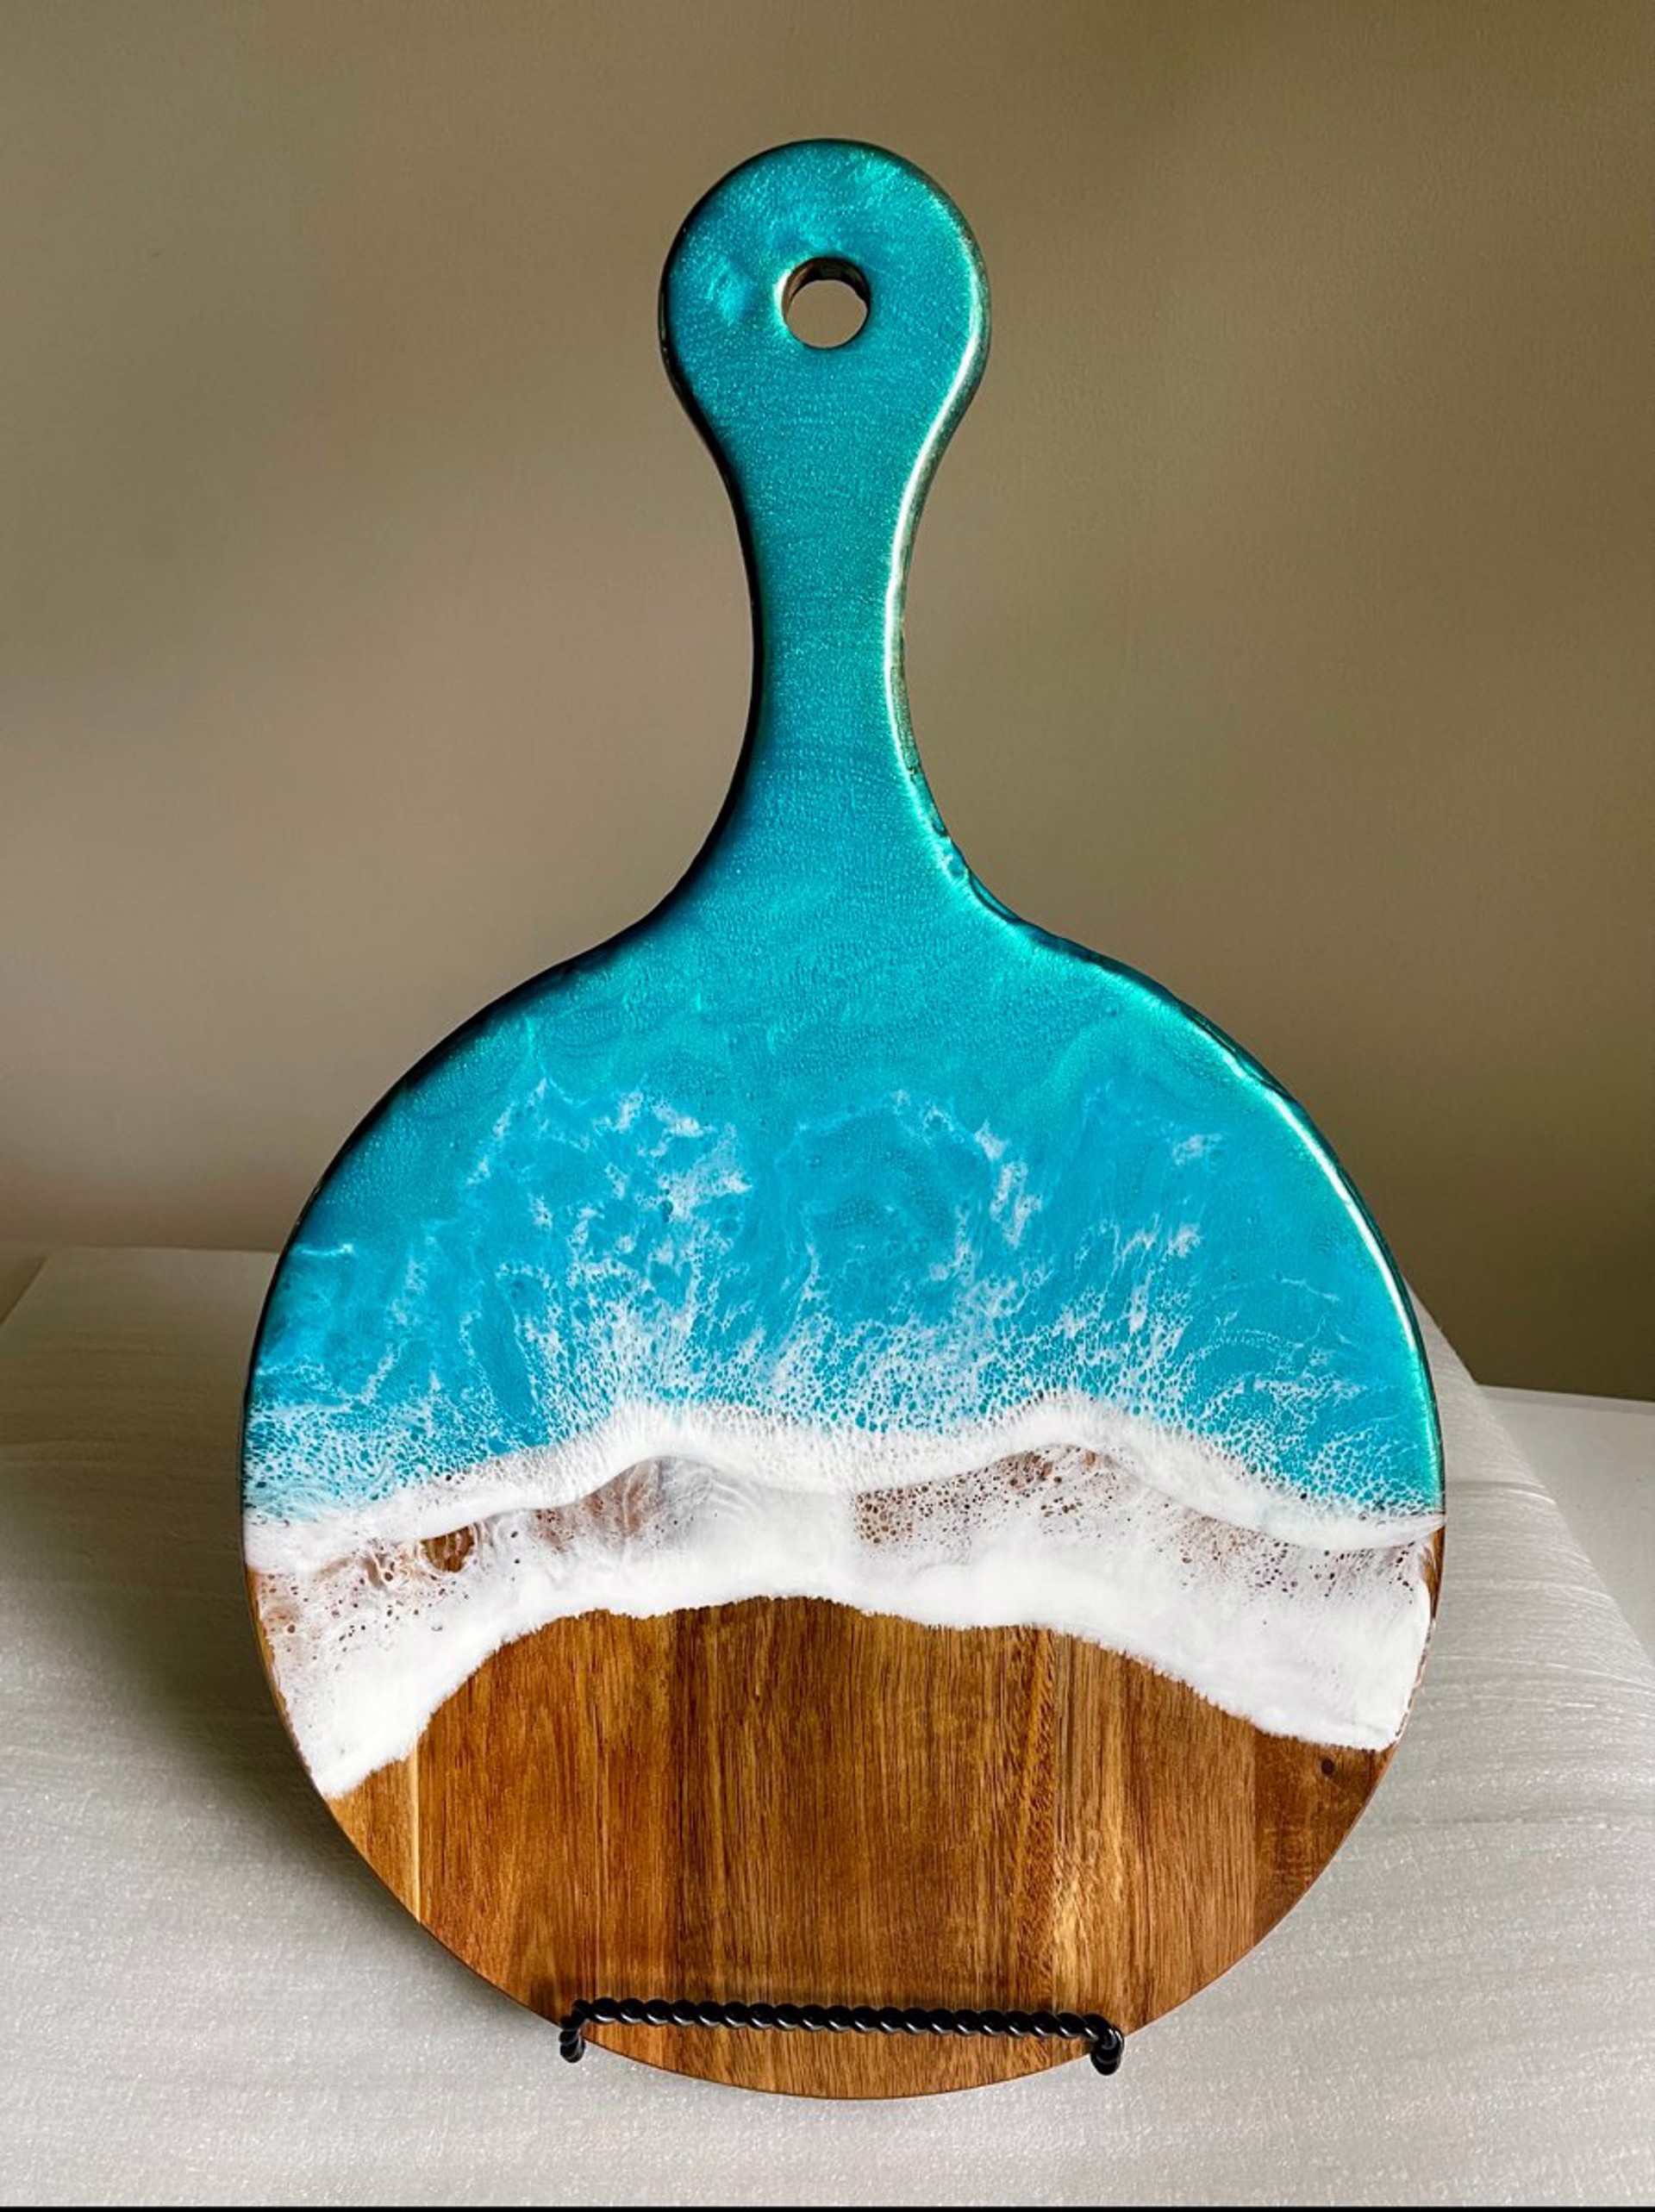 MDM22-19 Round Teal Resin and Wood Charcuterie Board by Mary Duke McCartt